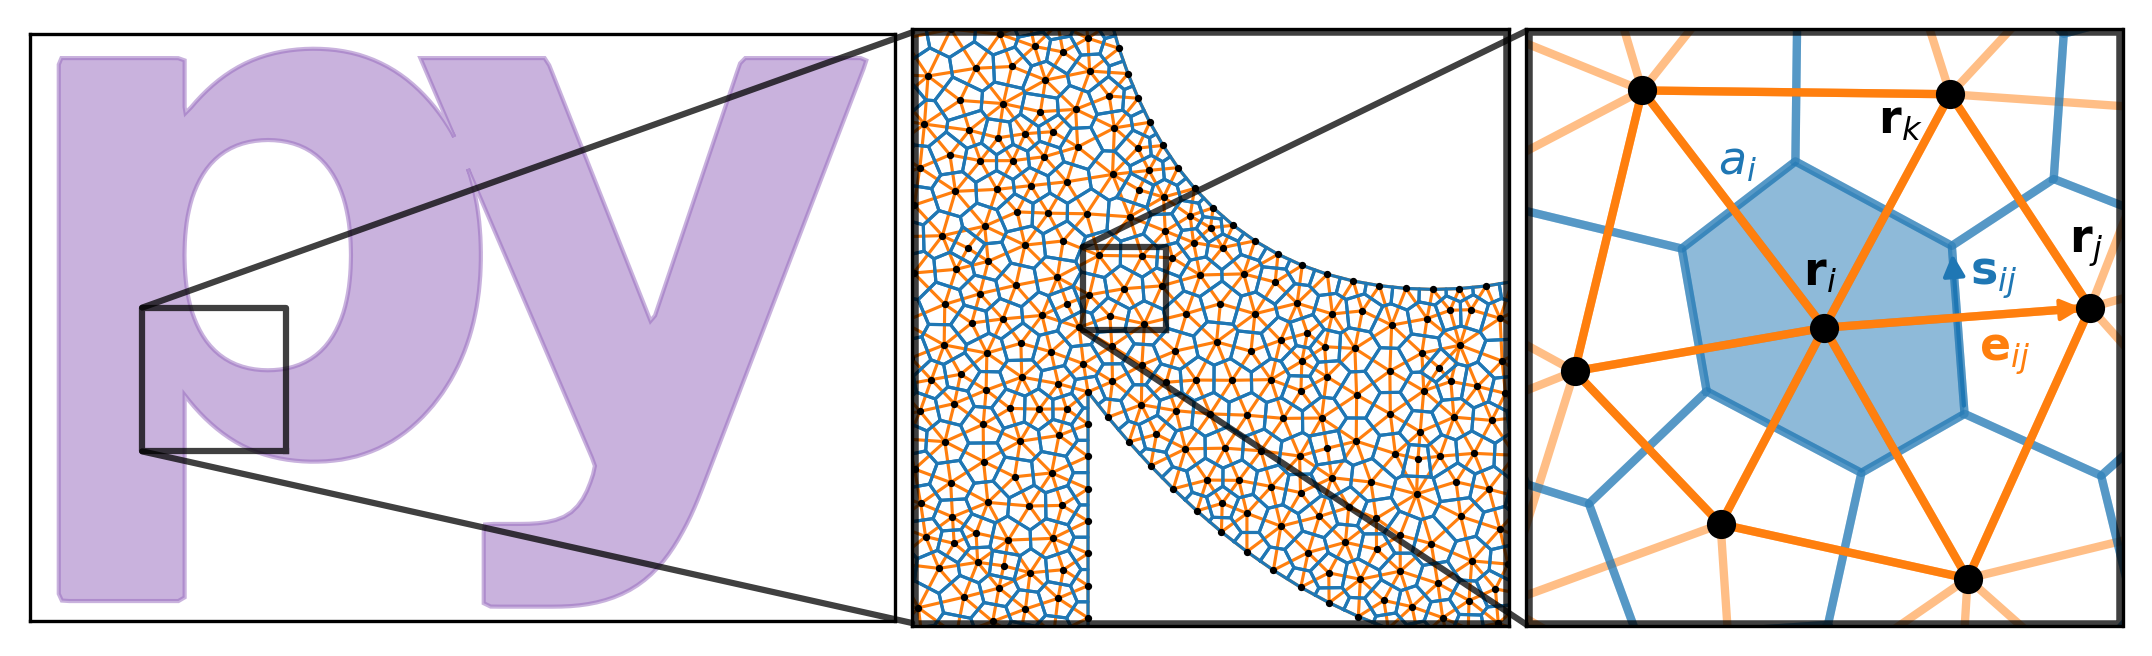 Schematic of a mesh.